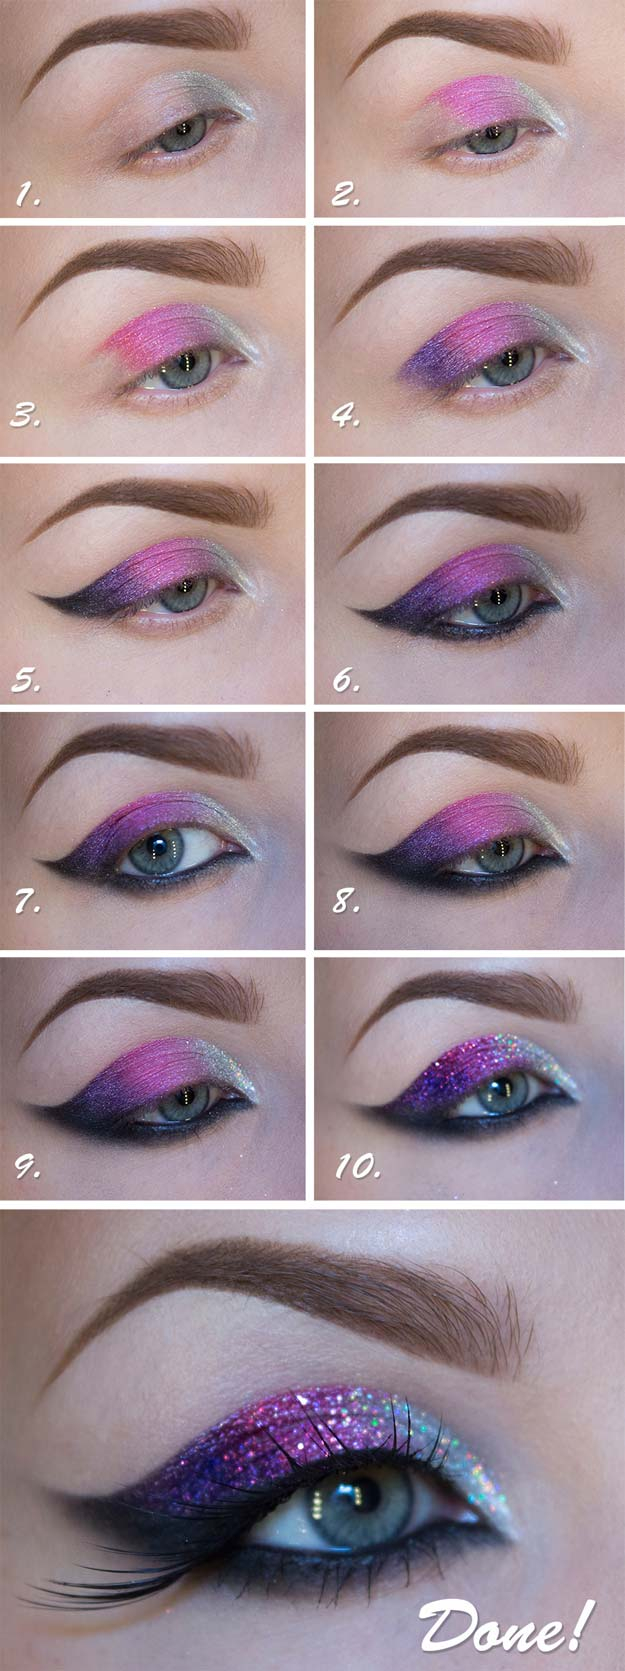 Homecoming Makeup For Blue Eyes 38 Makeup Ideas For Prom The Goddess